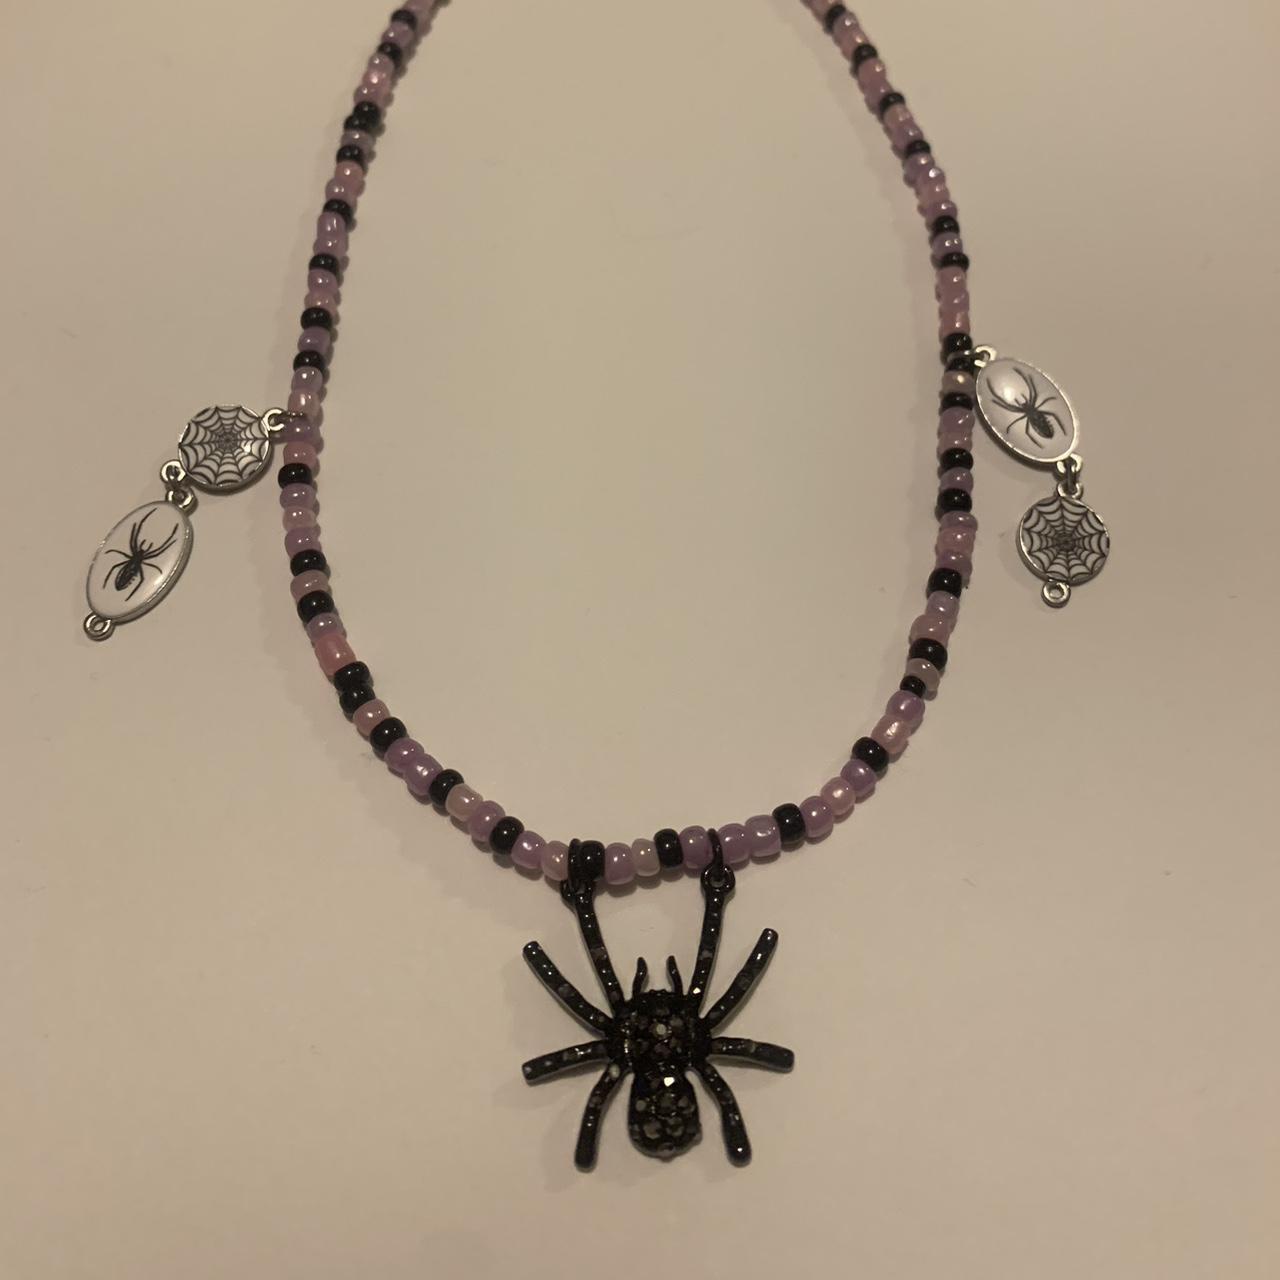 Goth Charms Jewelry Making, Jewelry Making Spider Charms